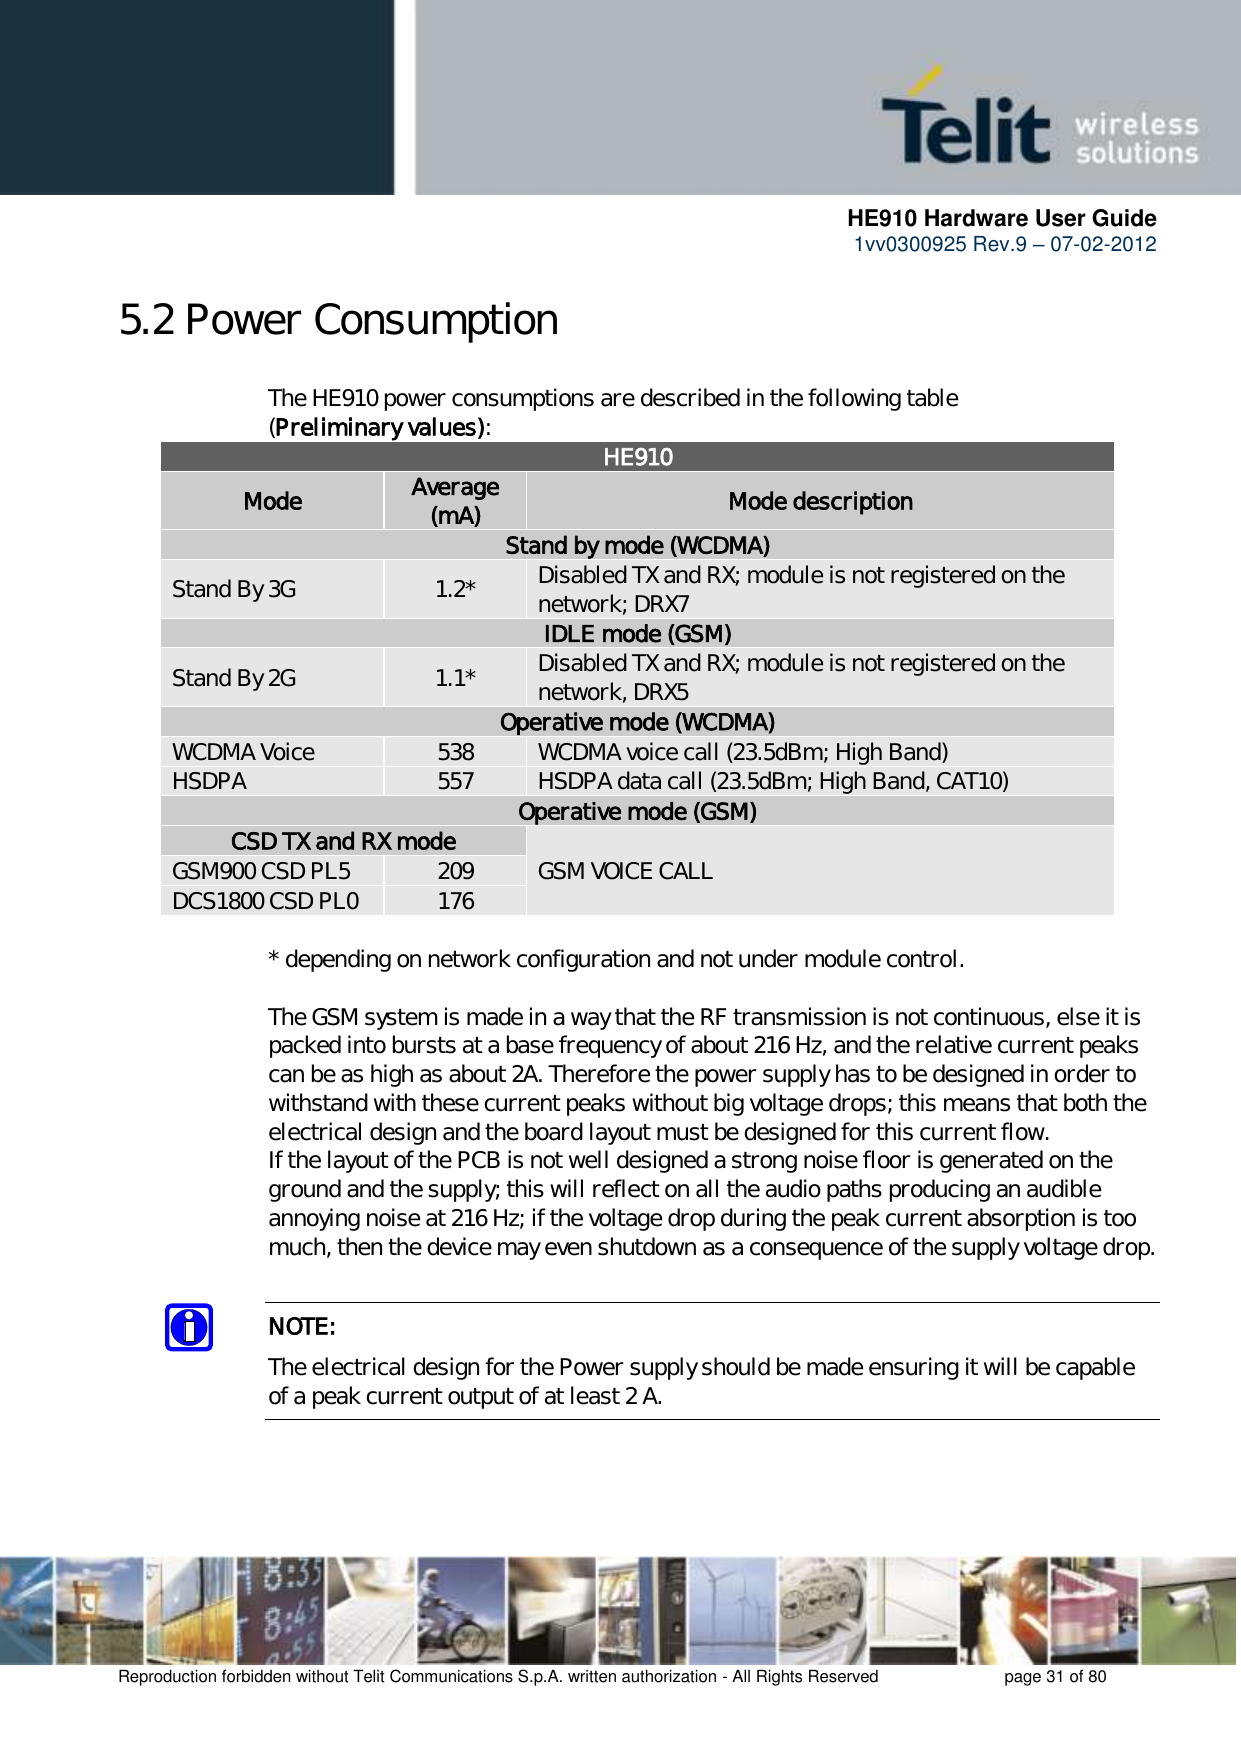      HE910 Hardware User Guide 1vv0300925 Rev.9 – 07-02-2012    Reproduction forbidden without Telit Communications S.p.A. written authorization - All Rights Reserved    page 31 of 80  5.2 Power Consumption The HE910 power consumptions are described in the following table  (Preliminary values):  HE910 Mode Average (mA) Mode description Stand by mode (WCDMA) Stand By 3G 1.2* Disabled TX and RX; module is not registered on the network; DRX7 IDLE mode (GSM) Stand By 2G 1.1* Disabled TX and RX; module is not registered on the network, DRX5 Operative mode (WCDMA) WCDMA Voice 538 WCDMA voice call (23.5dBm; High Band) HSDPA 557 HSDPA data call (23.5dBm; High Band, CAT10) Operative mode (GSM) CSD TX and RX mode GSM VOICE CALL GSM900 CSD PL5 209 DCS1800 CSD PL0 176  * depending on network configuration and not under module control.  The GSM system is made in a way that the RF transmission is not continuous, else it is packed into bursts at a base frequency of about 216 Hz, and the relative current peaks can be as high as about 2A. Therefore the power supply has to be designed in order to withstand with these current peaks without big voltage drops; this means that both the electrical design and the board layout must be designed for this current flow. If the layout of the PCB is not well designed a strong noise floor is generated on the ground and the supply; this will reflect on all the audio paths producing an audible annoying noise at 216 Hz; if the voltage drop during the peak current absorption is too much, then the device may even shutdown as a consequence of the supply voltage drop.  NOTE: The electrical design for the Power supply should be made ensuring it will be capable of a peak current output of at least 2 A. 